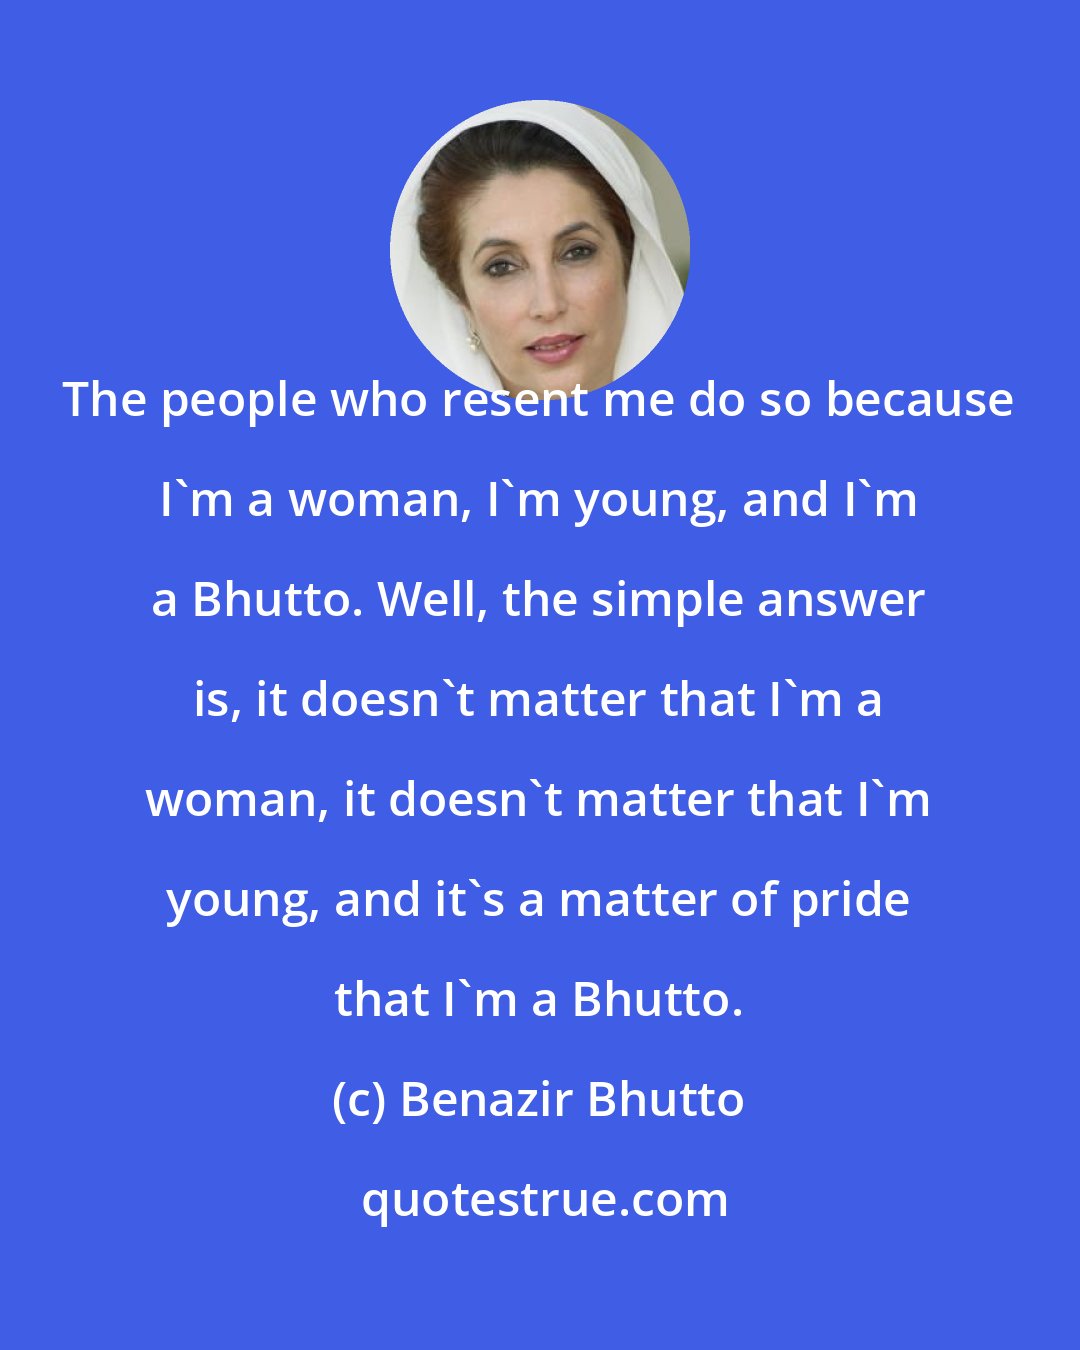 Benazir Bhutto: The people who resent me do so because I'm a woman, I'm young, and I'm a Bhutto. Well, the simple answer is, it doesn't matter that I'm a woman, it doesn't matter that I'm young, and it's a matter of pride that I'm a Bhutto.